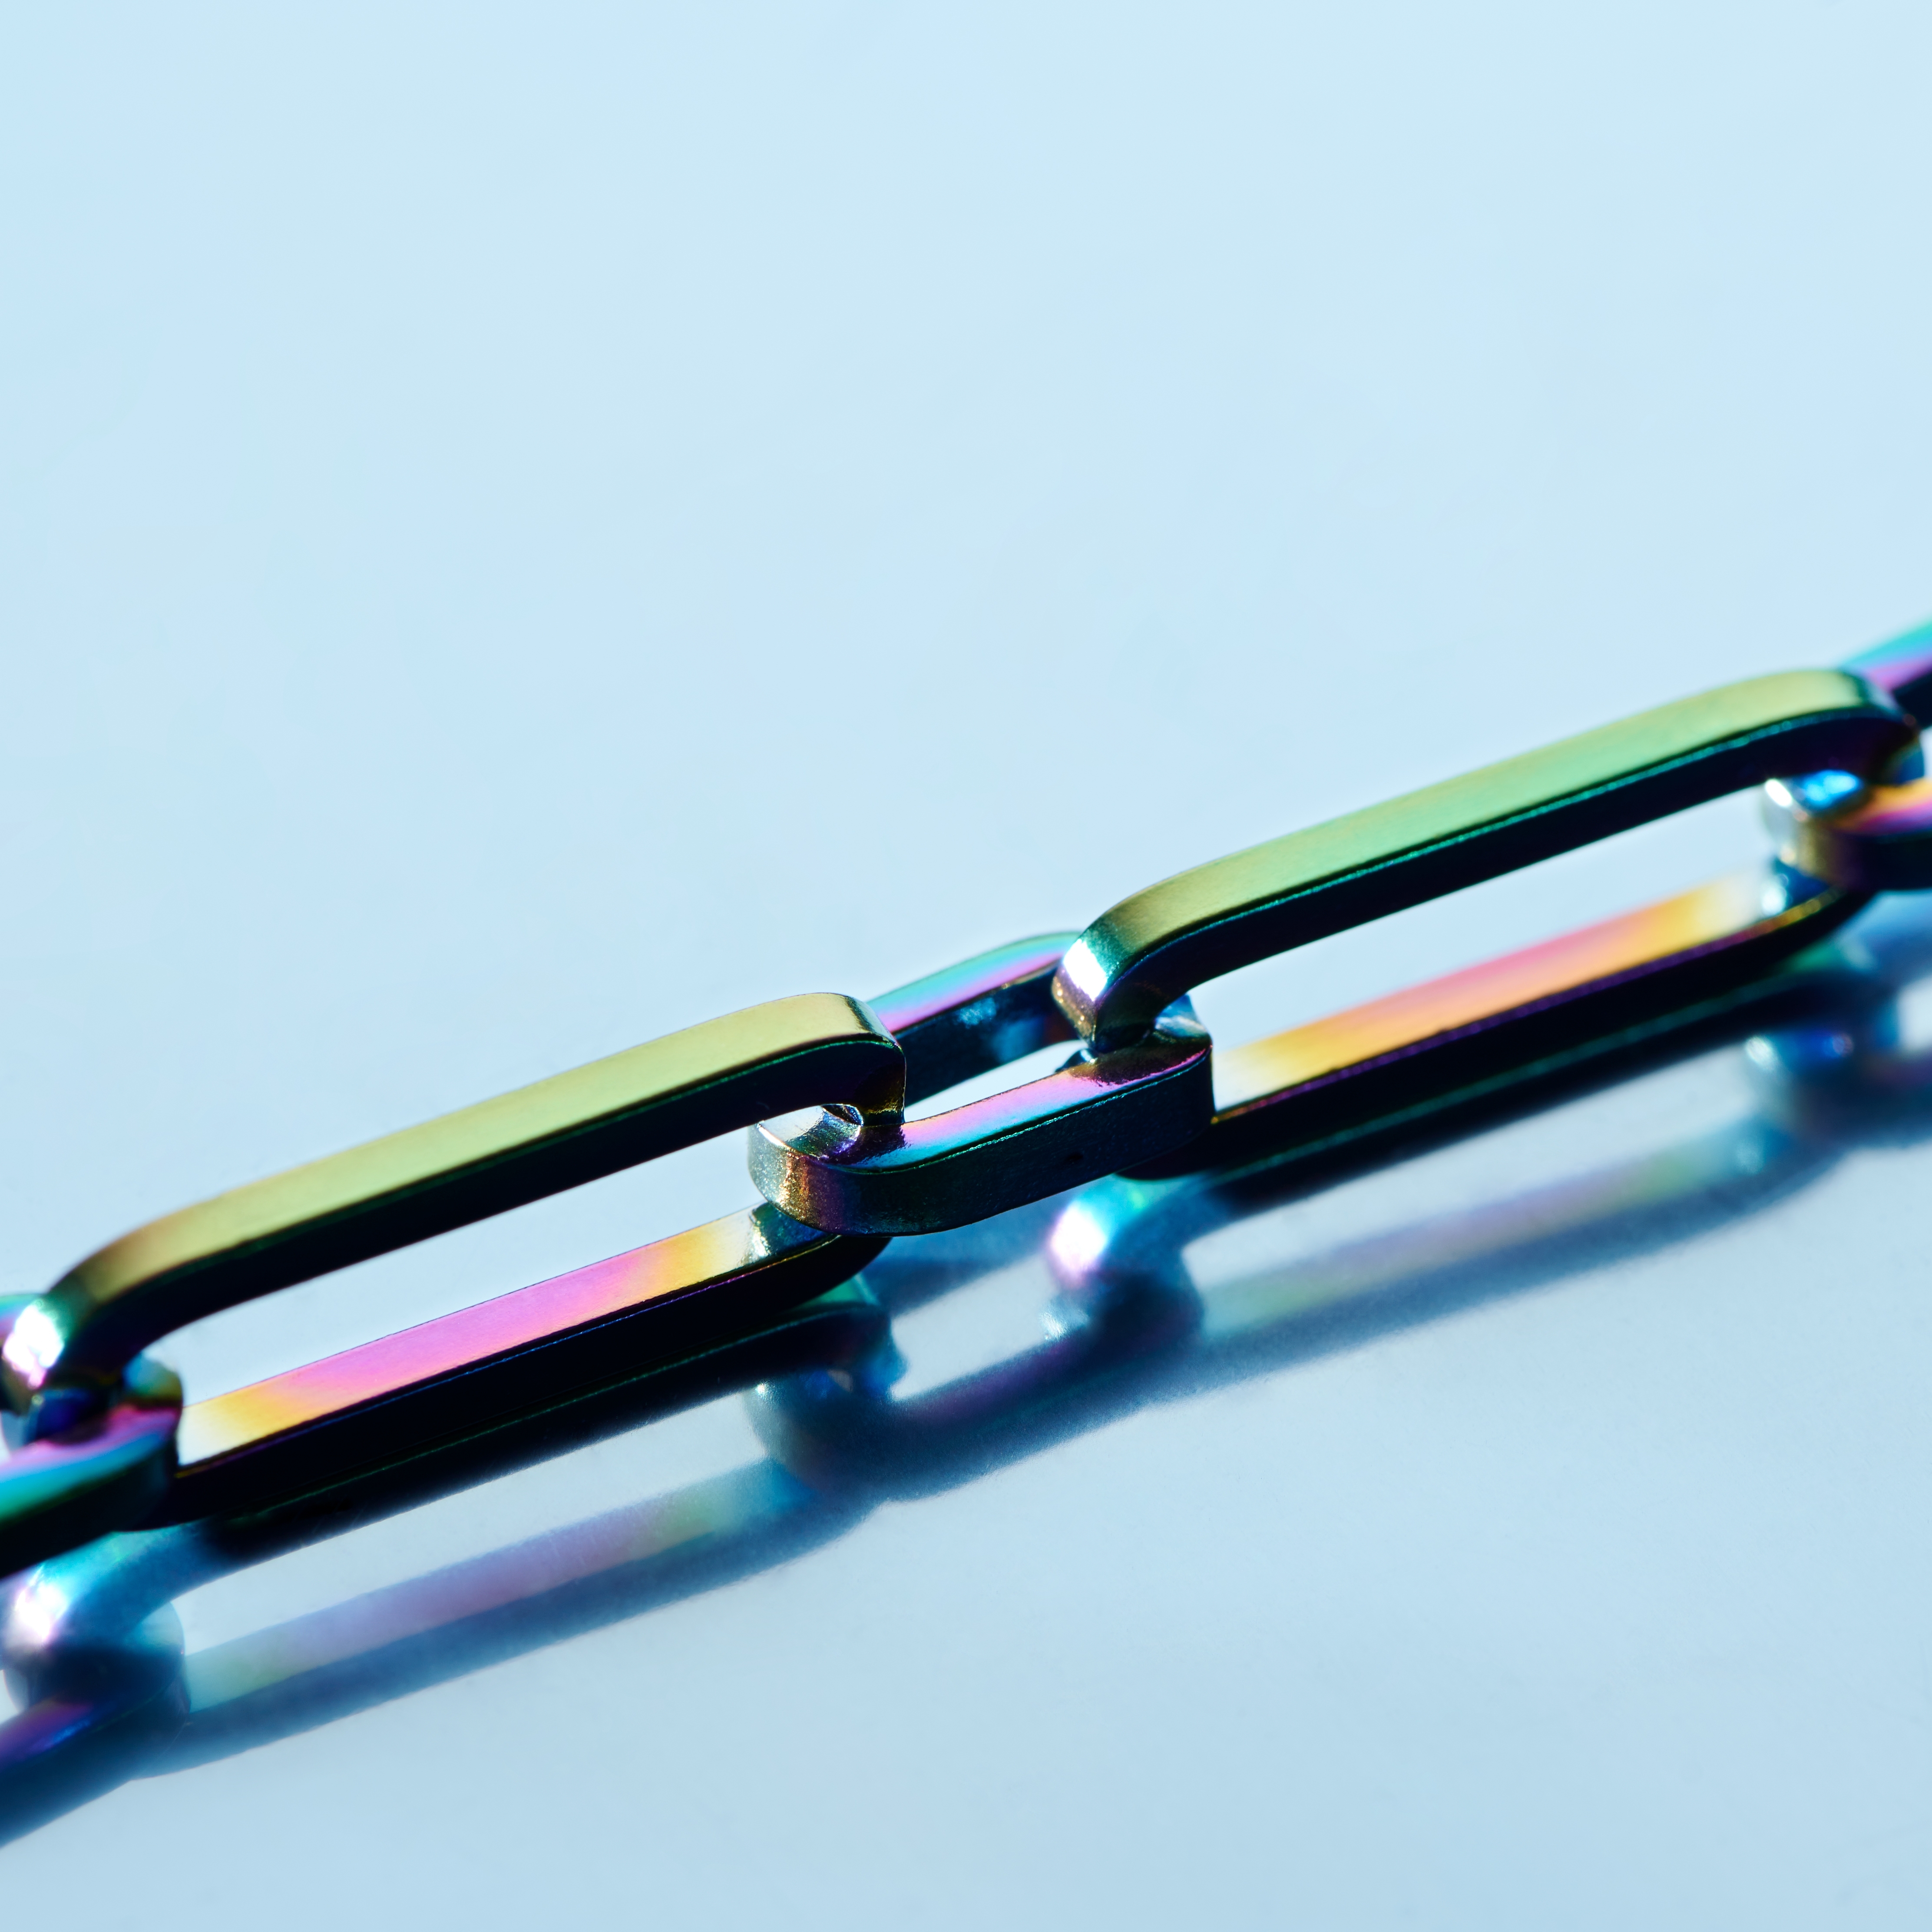 Amager, Rainbow Stainless Steel Cable Chain Bracelet, In stock!